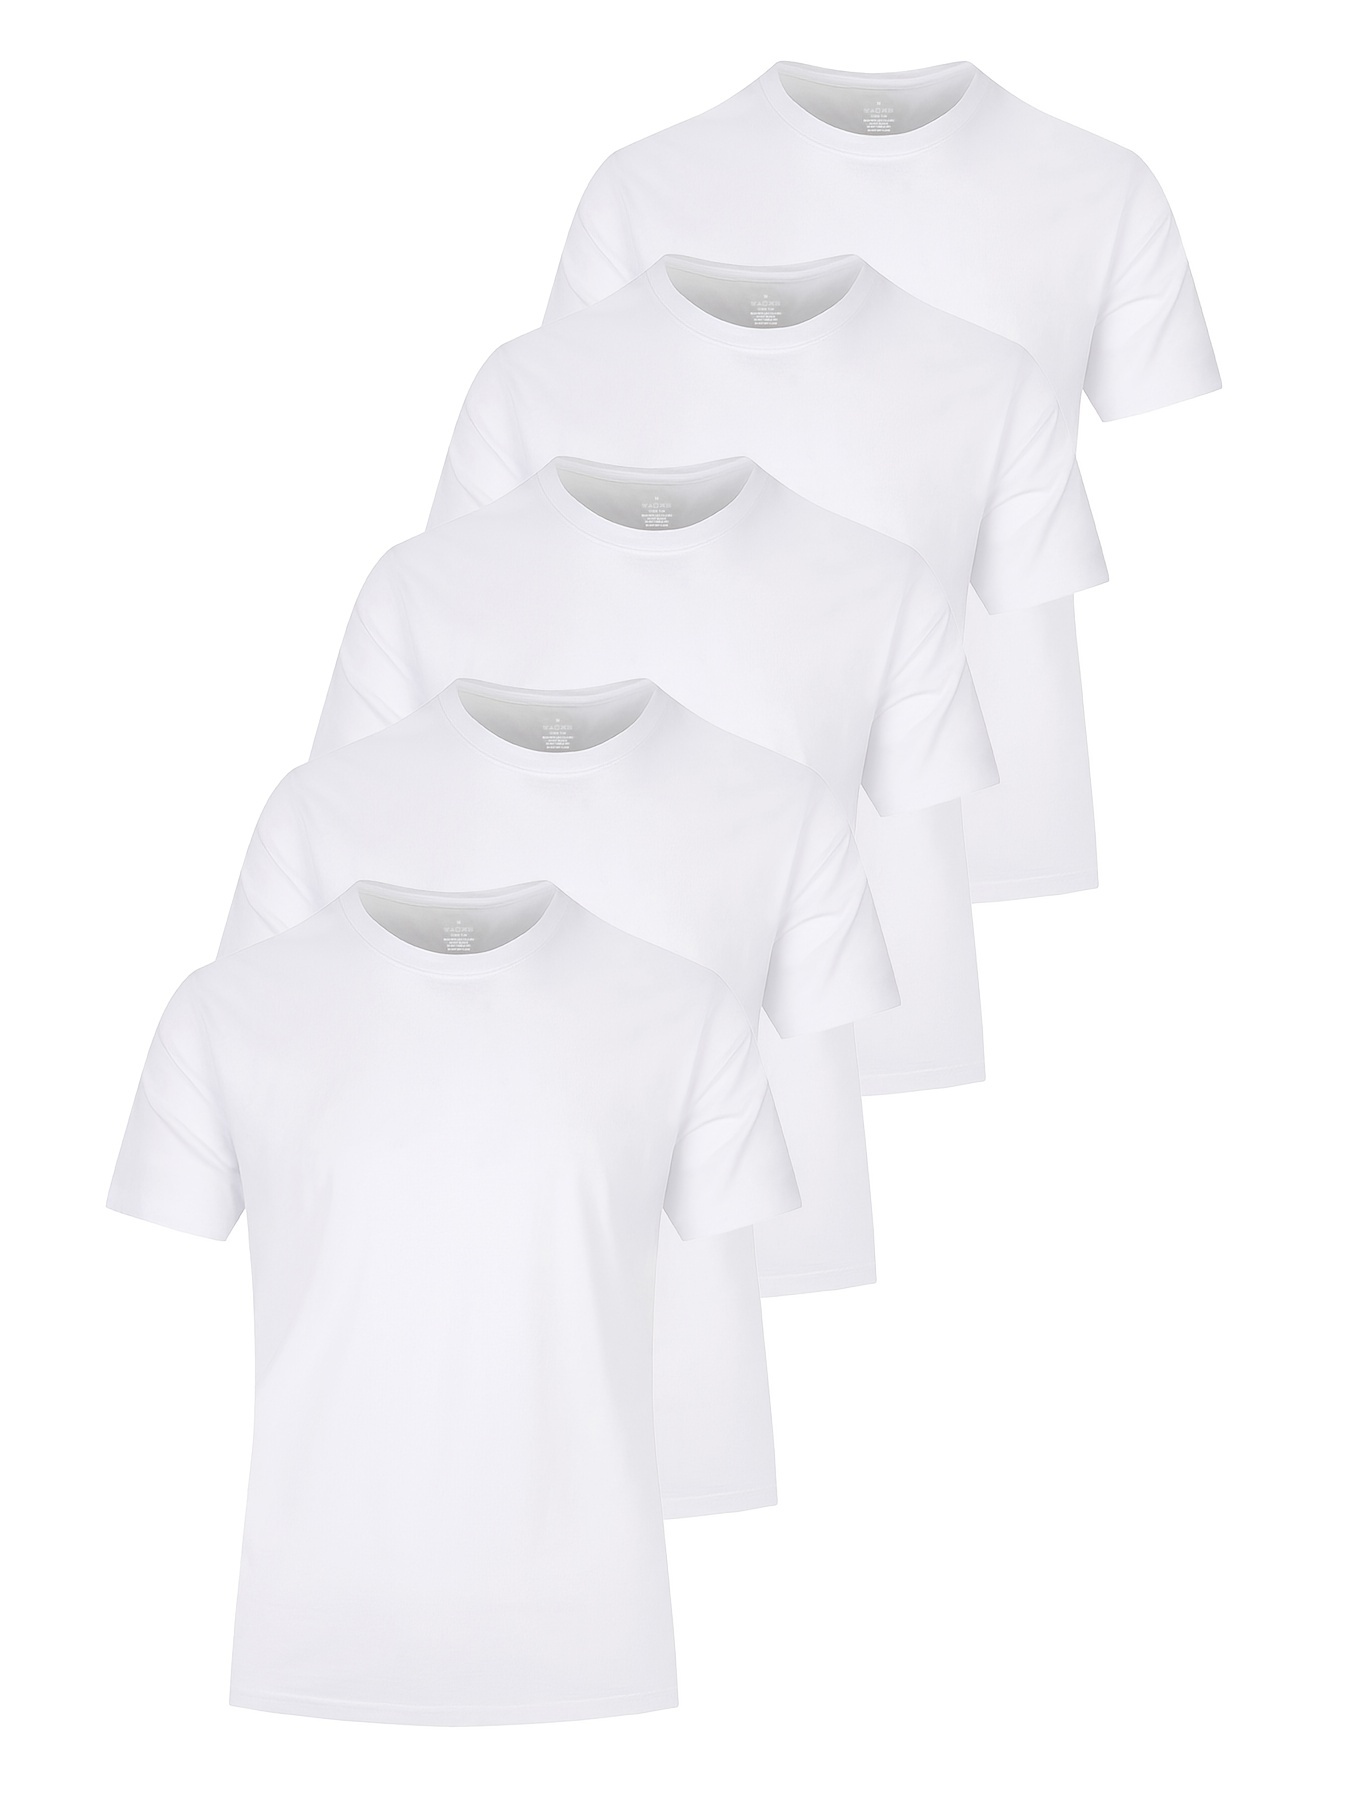 5pcs mens casual solid lightweight crew neck t shirts set for summer outdoor details 15